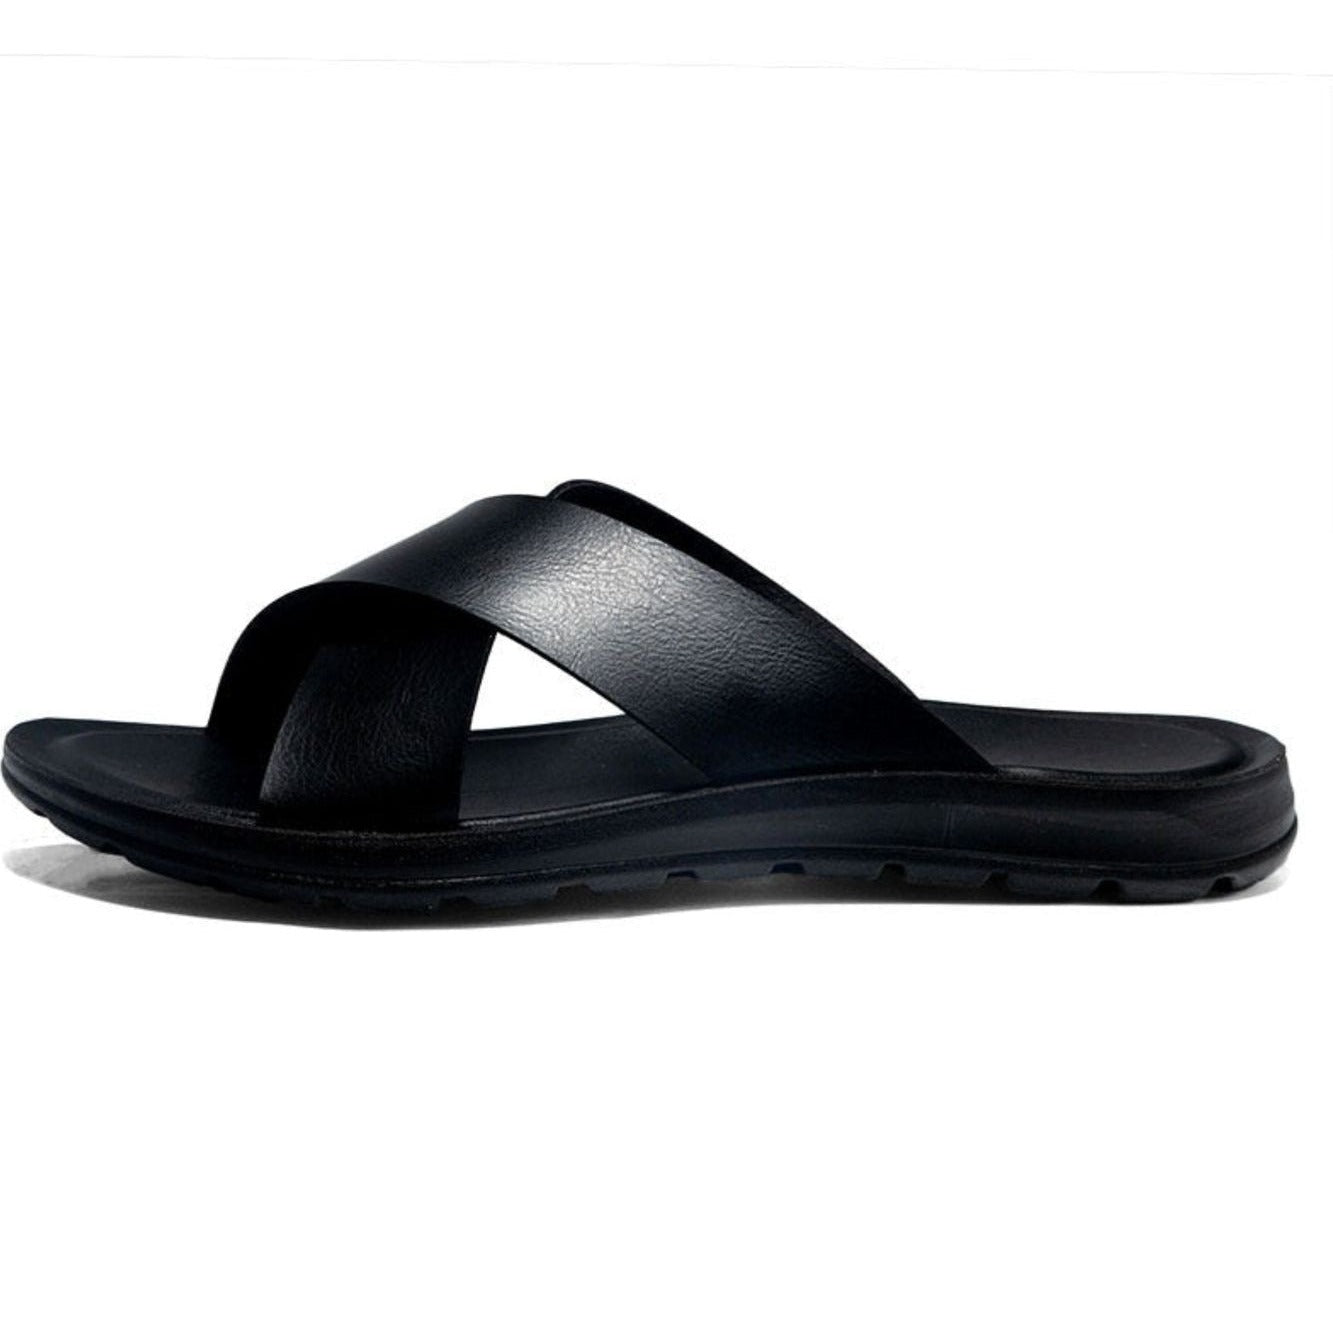 Men's Leather T-Buckle Sandals - Casual Leather Slippers - A.A.Y FASHION